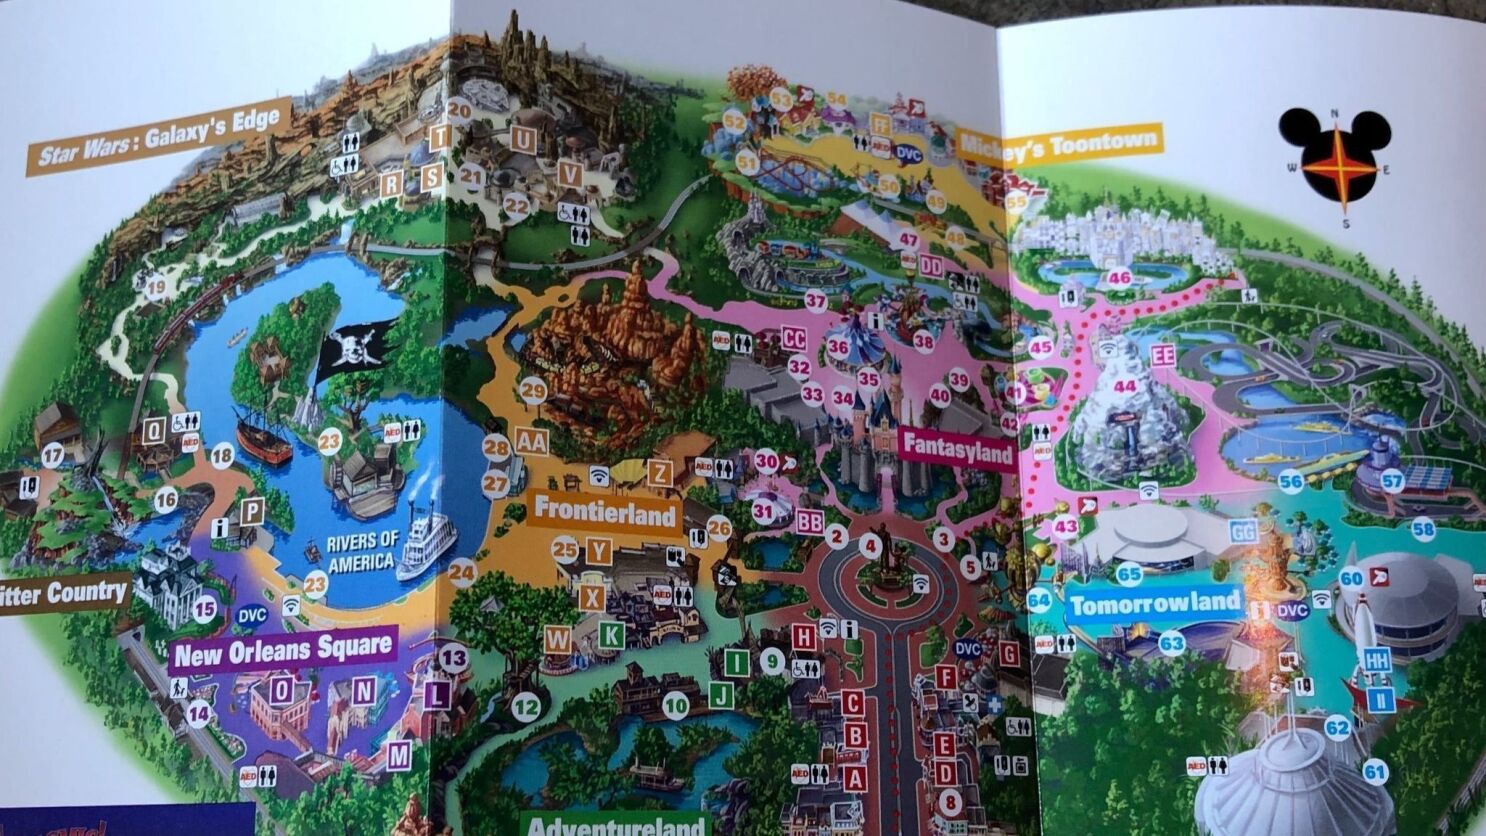 Here S The New Map Of Disneyland With Star Wars Galaxy S Edge Los Angeles Times